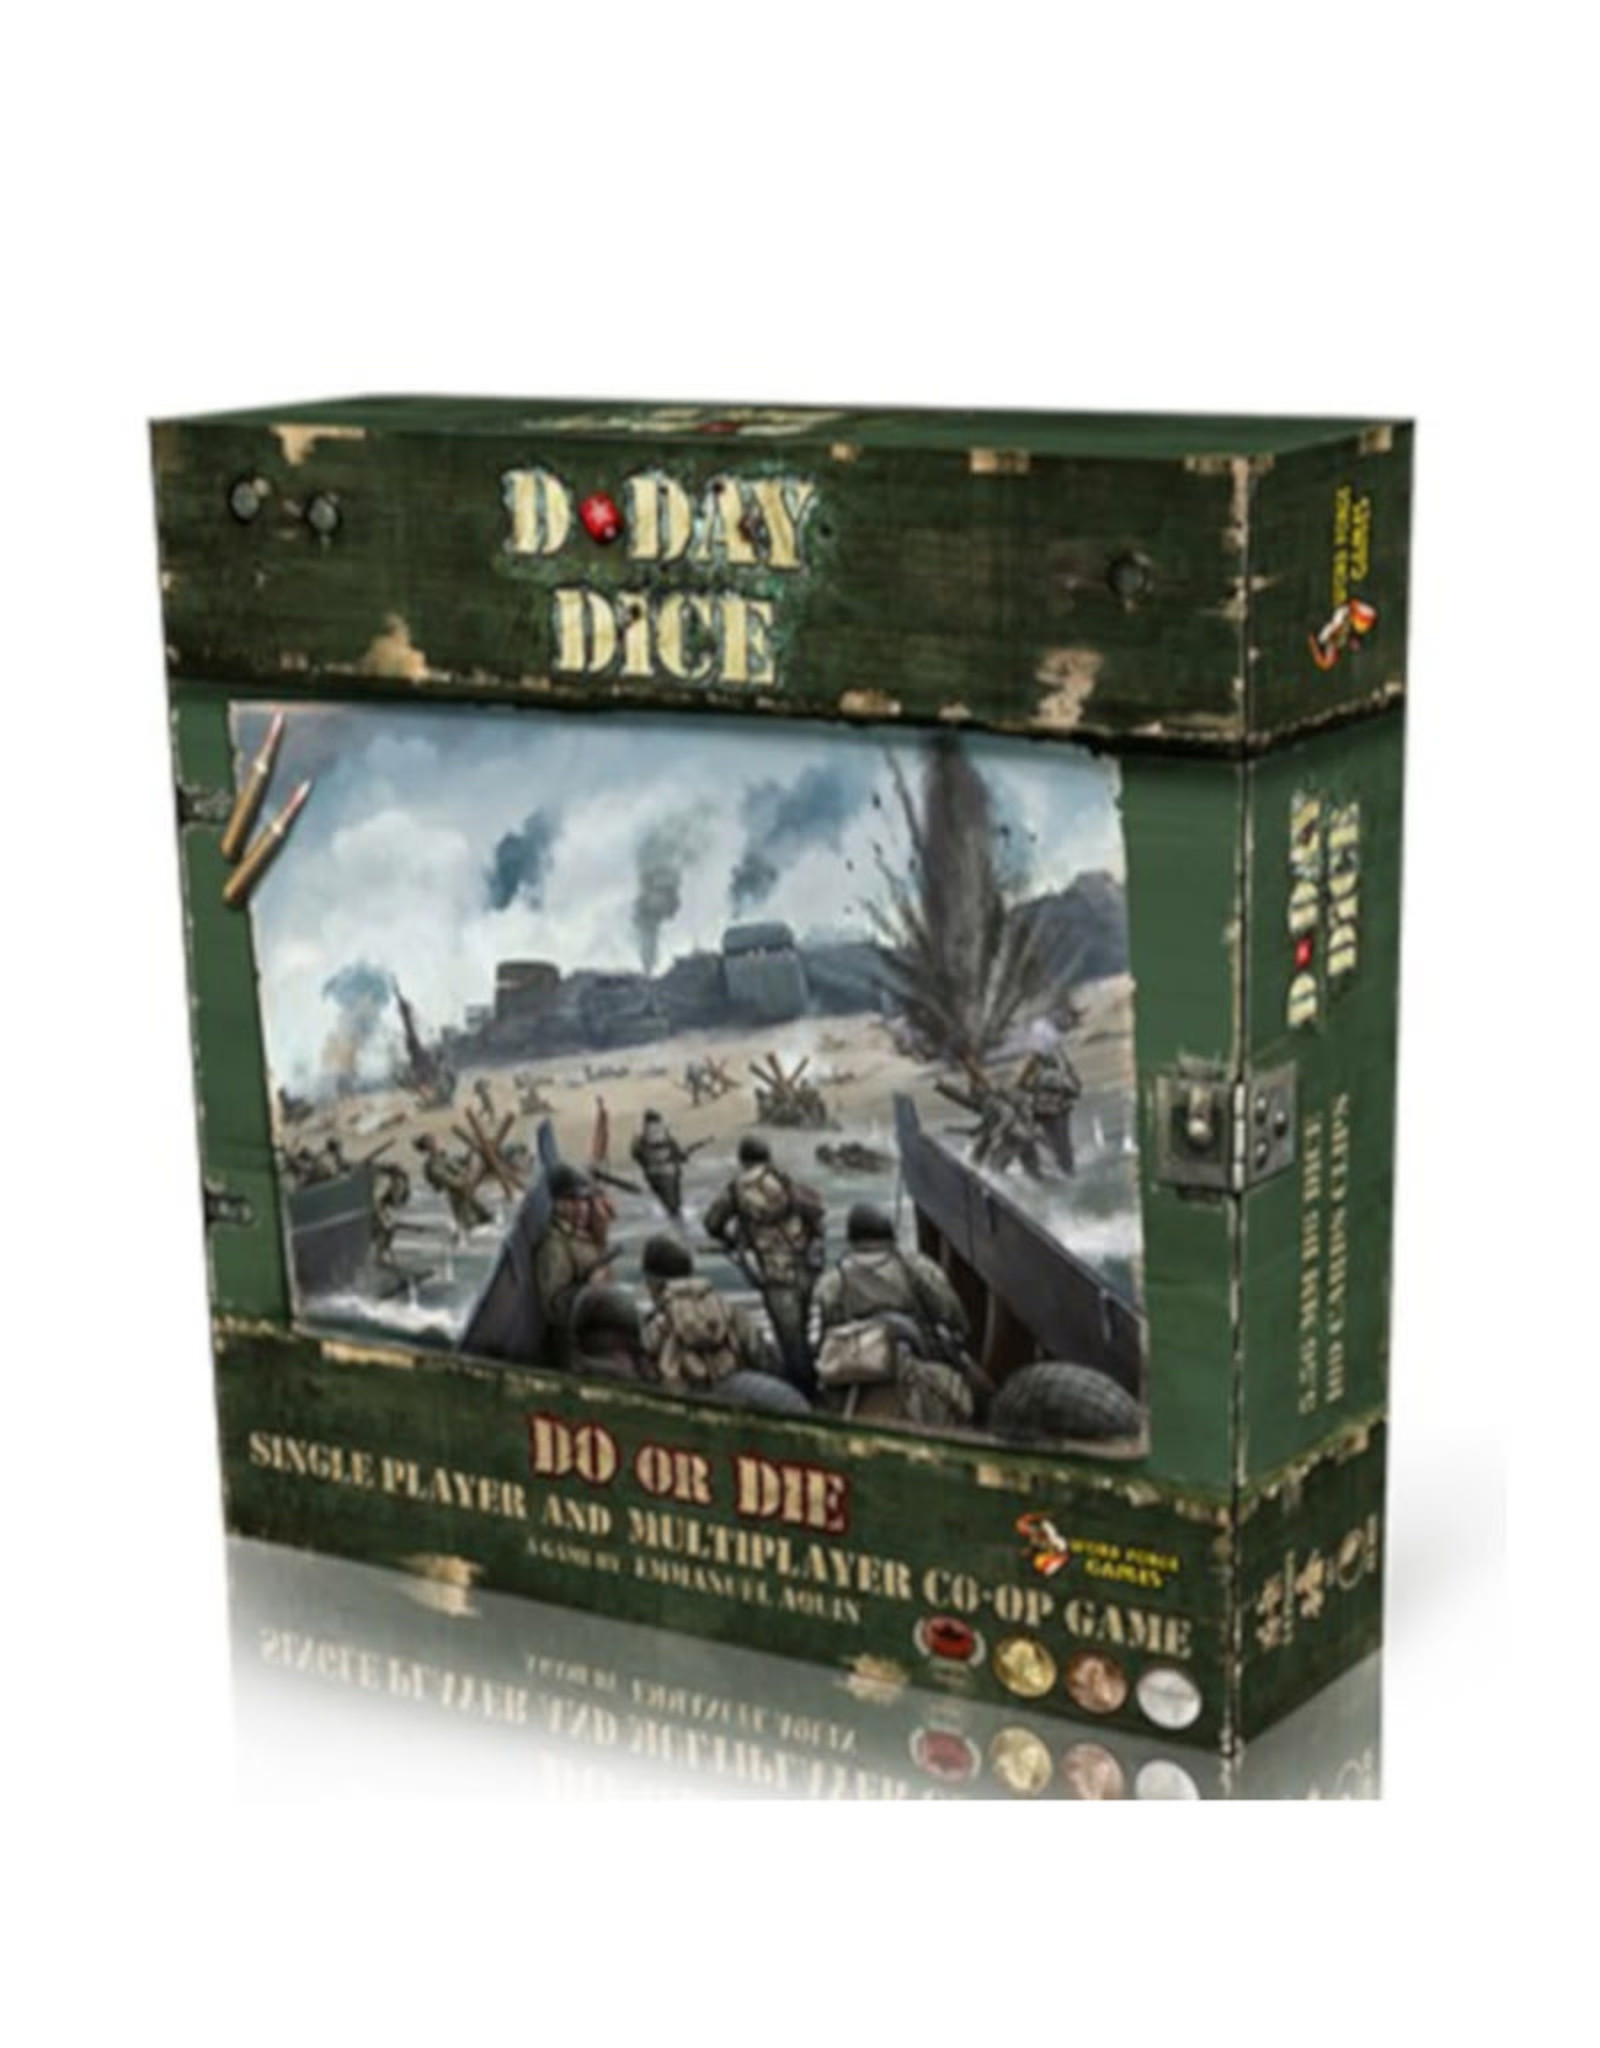 Misc D-Day Dice (2nd Ed.)